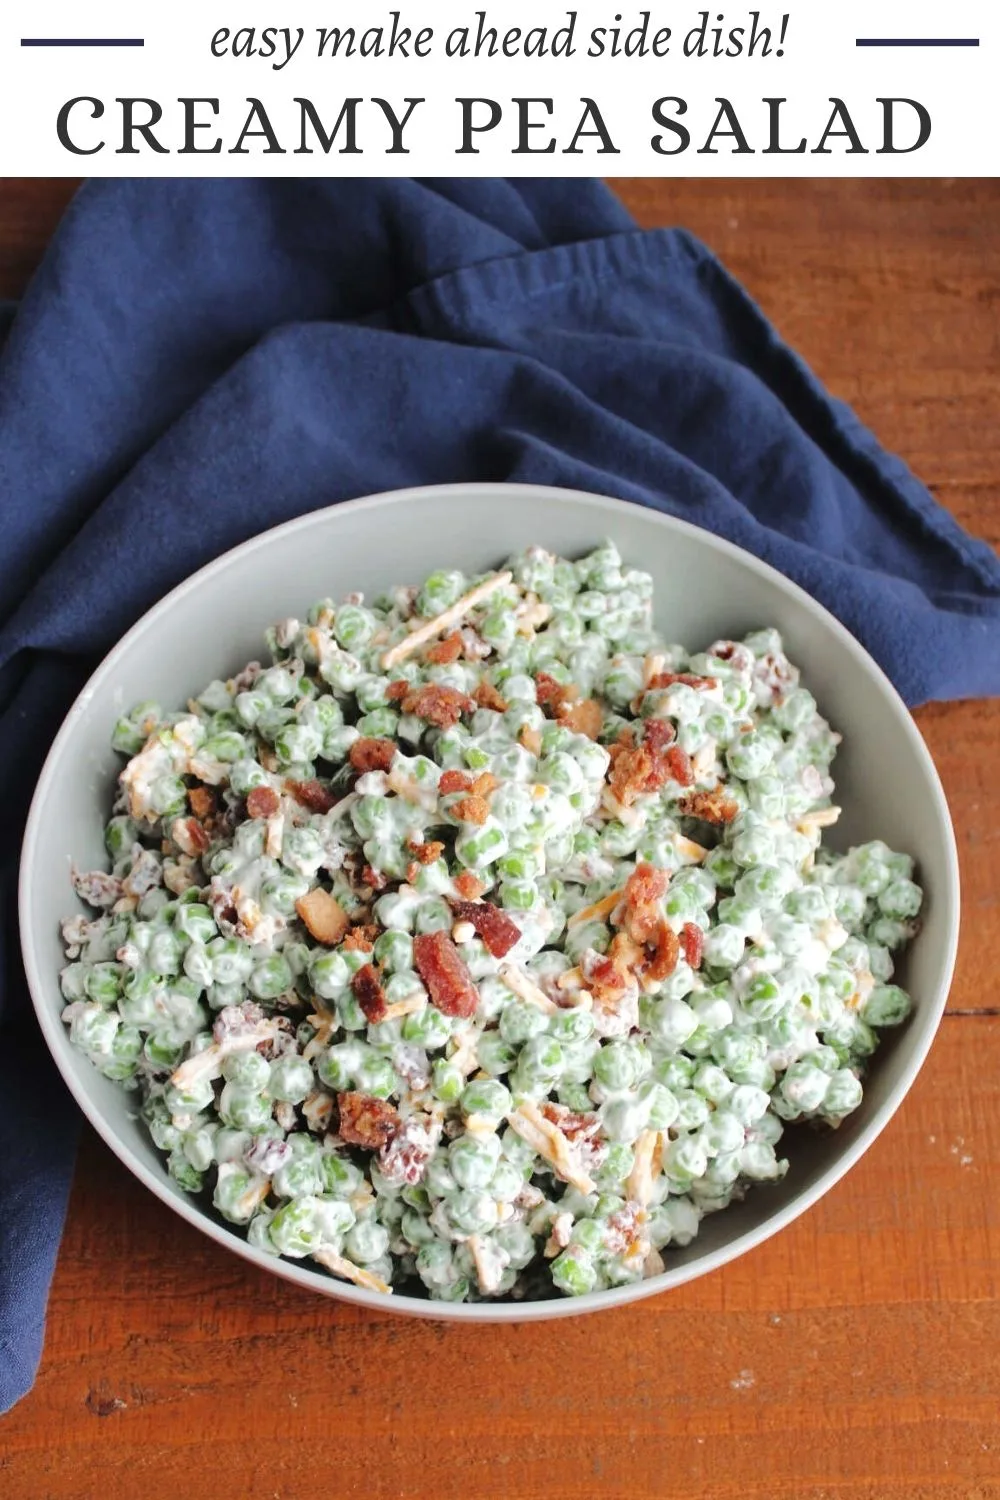 This delicious spring pea salad is perfect for a picnic, or Easter or any time. It is super easy to throw together and tastes great using either fresh or defrosted frozen peas. The bacon, cheese and creamy tie it all together in a side dish that will keep you coming back for more.